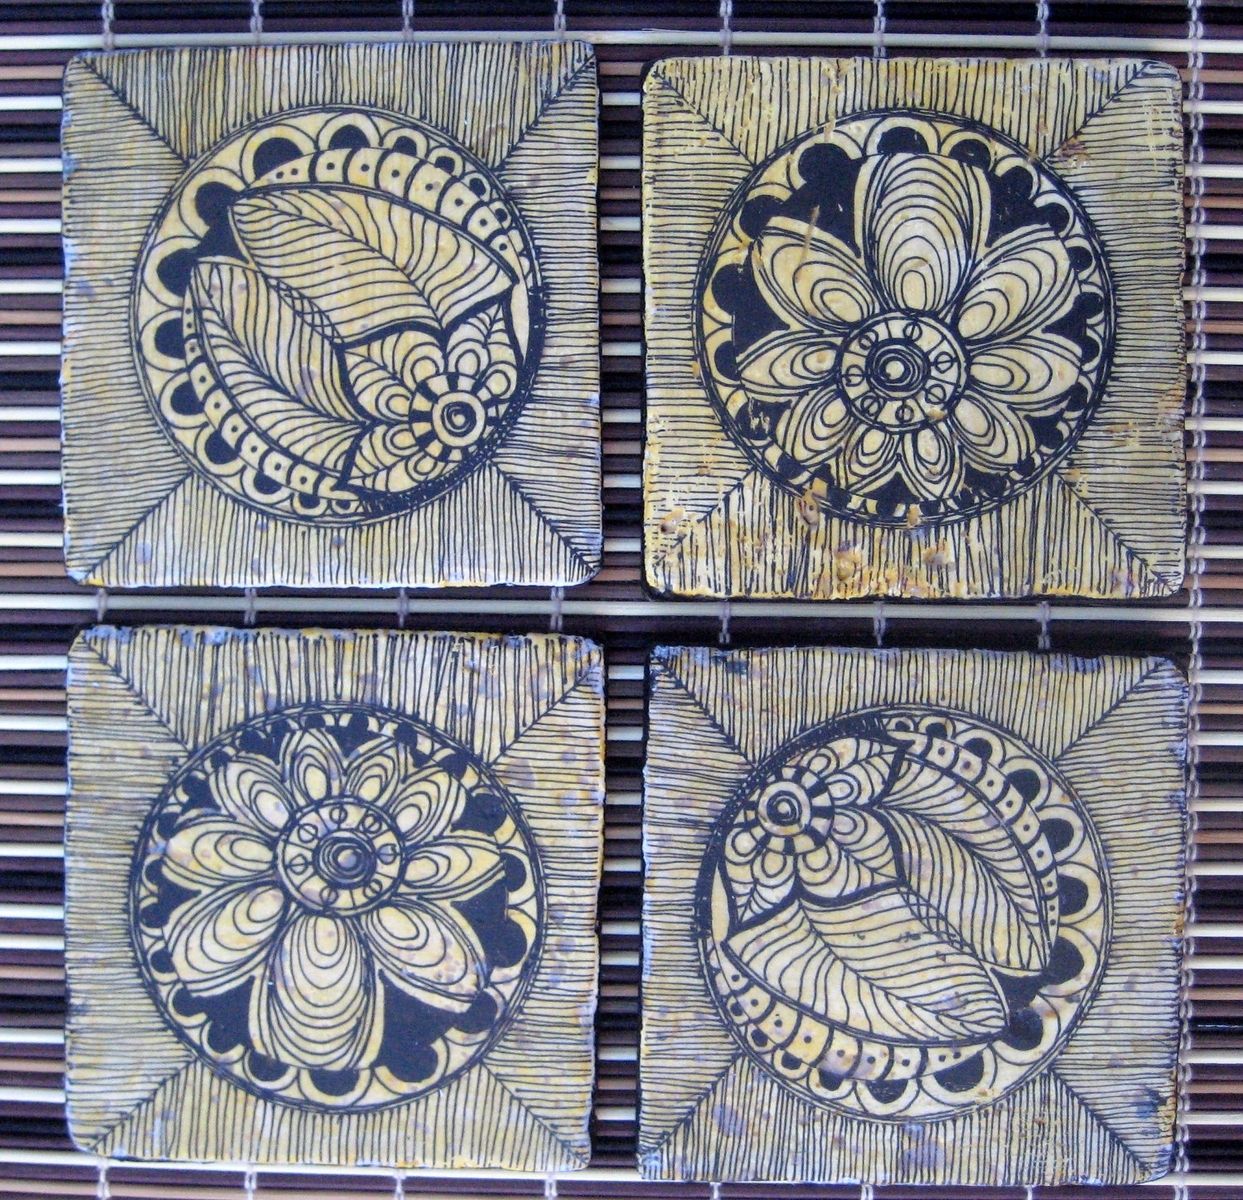 Four Tile Coaster with Flowers